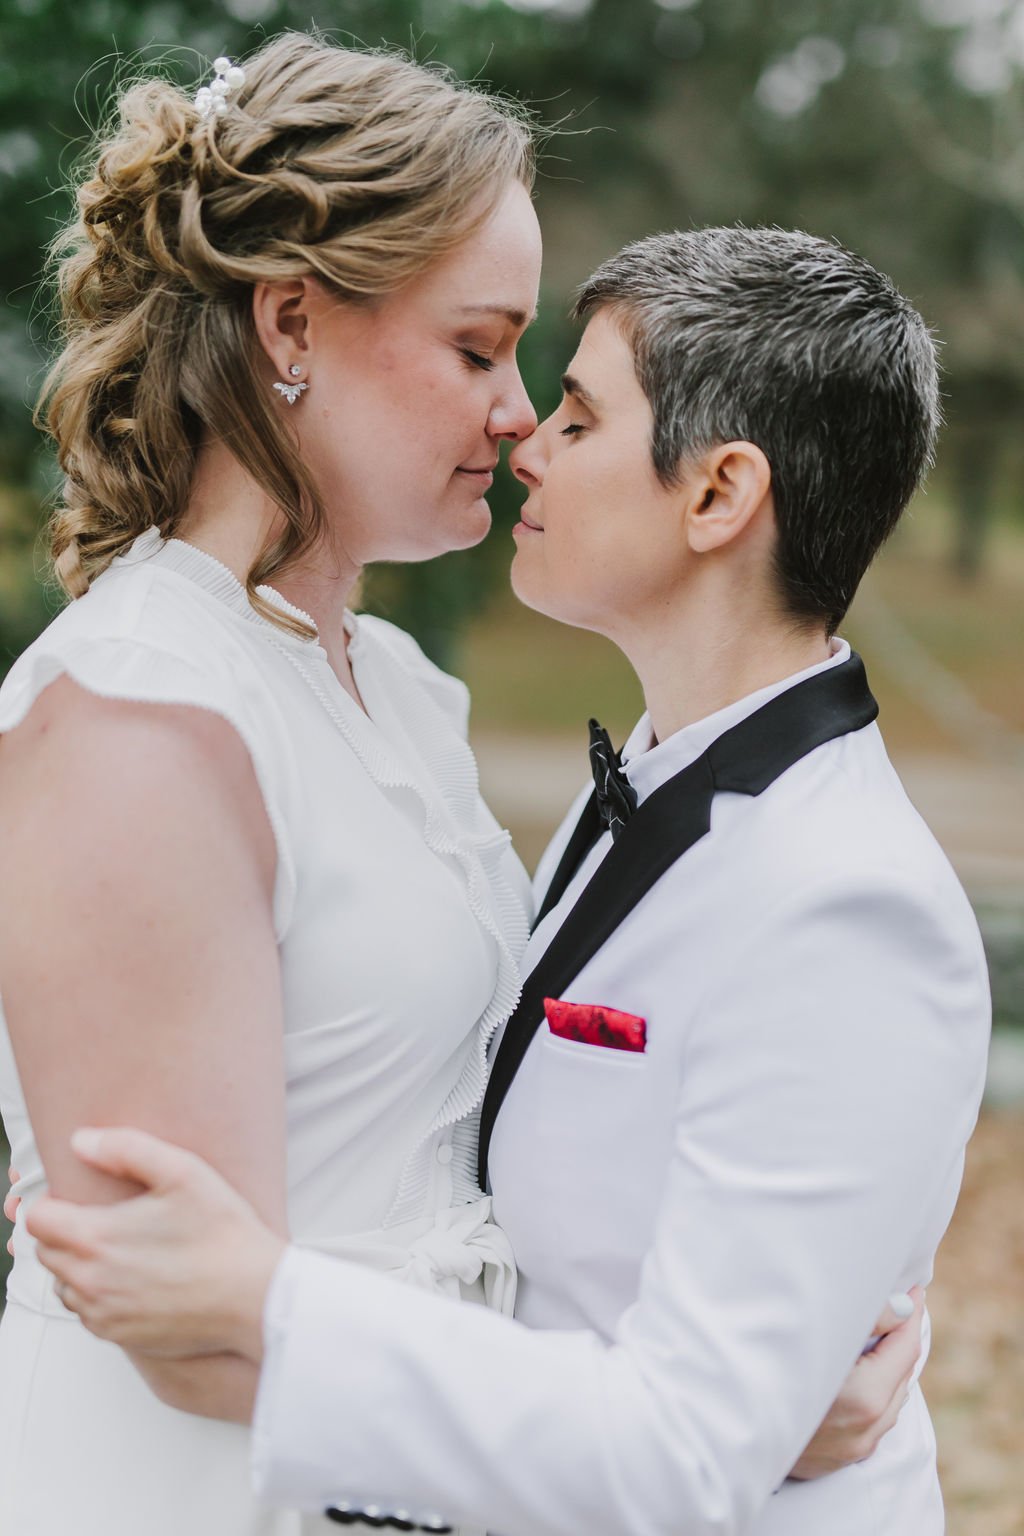 Tobey+Lindsey'sWedding-EmilyTebbettsPhotography-7 Intimate Queer Lesbian LGBTQ Winter Boston Arboretum Jamaica Plain Roslindale Wedding at the Milky Way Lounge and Restaurant in Massachusetts new england by queer elopement photographer .jpg